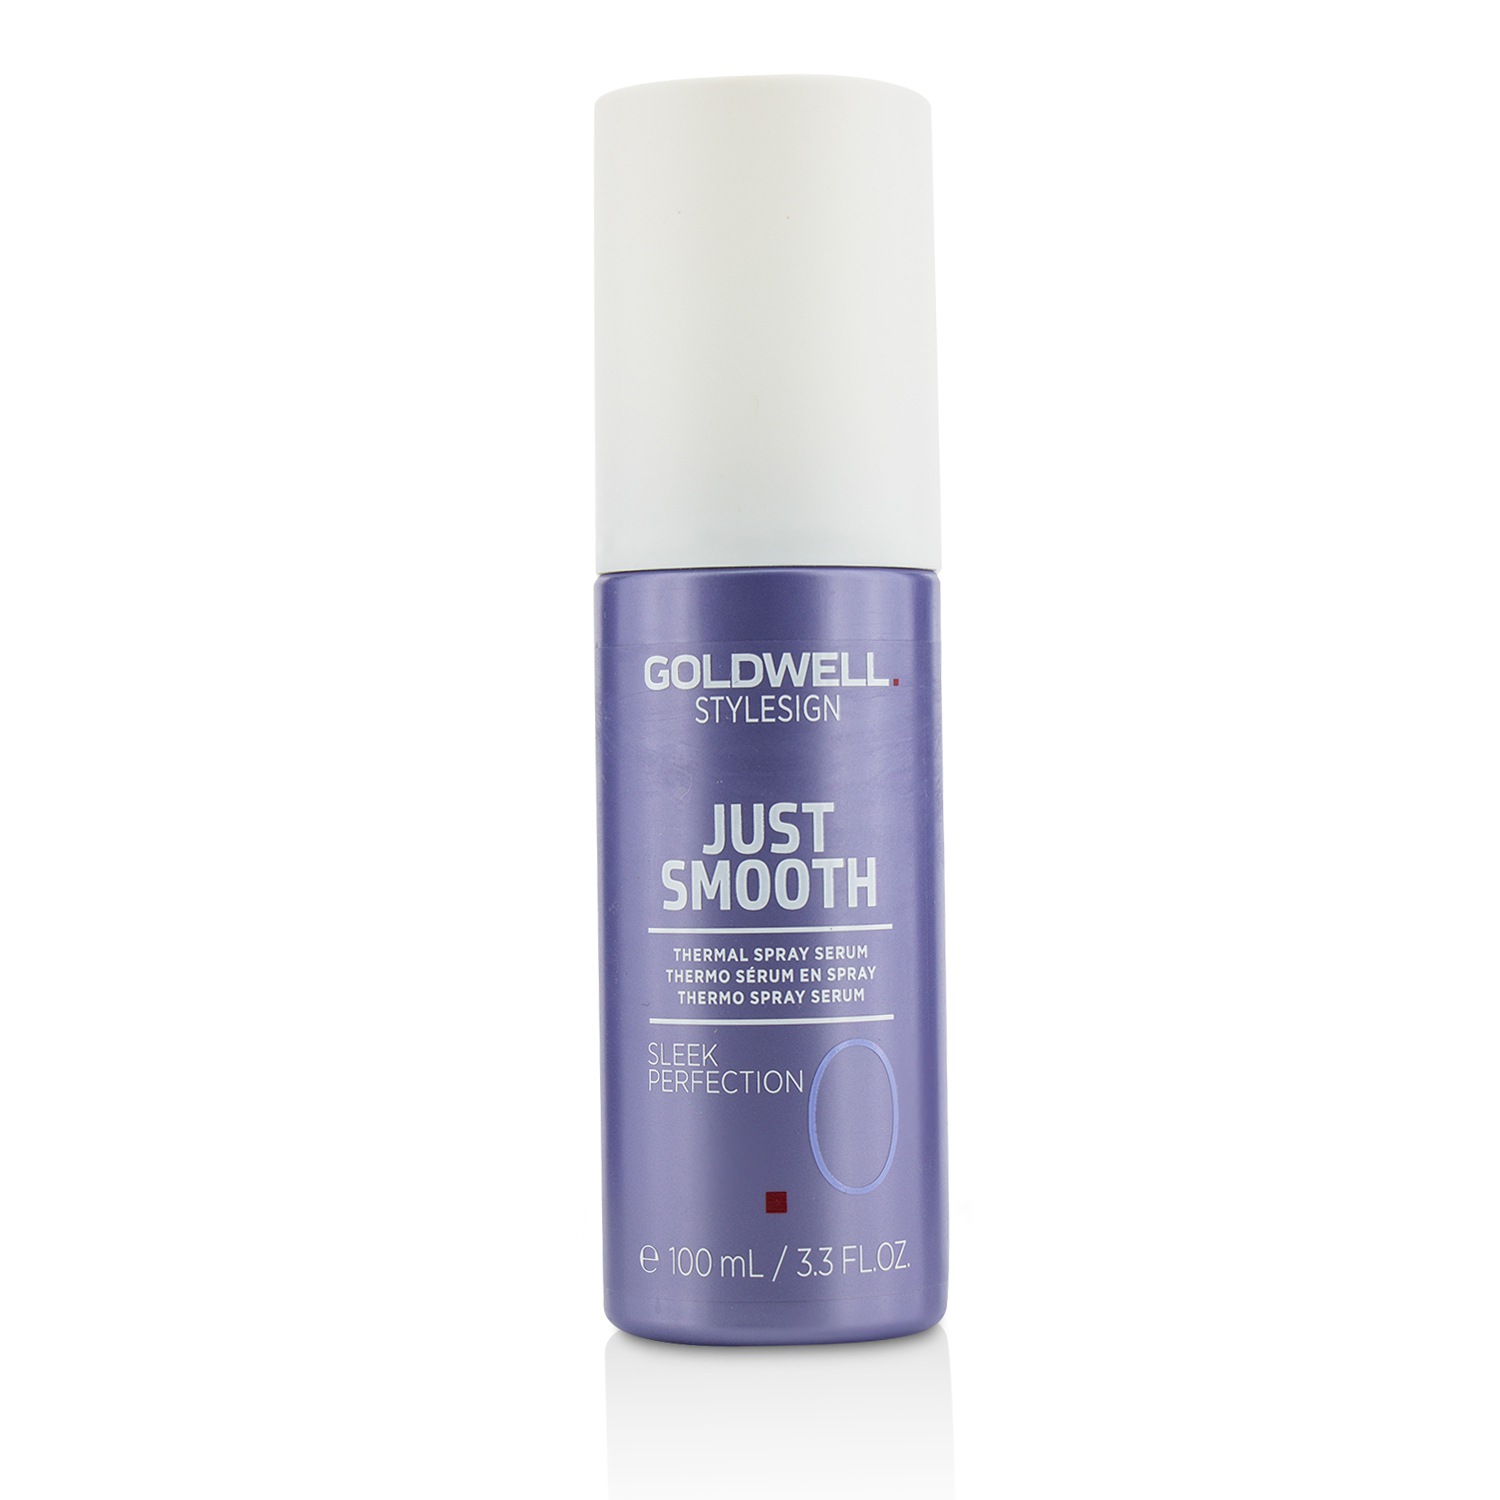 Style Sign Just Smooth Sleek Perfection 0 Thermal Spray Serum Goldwell Image